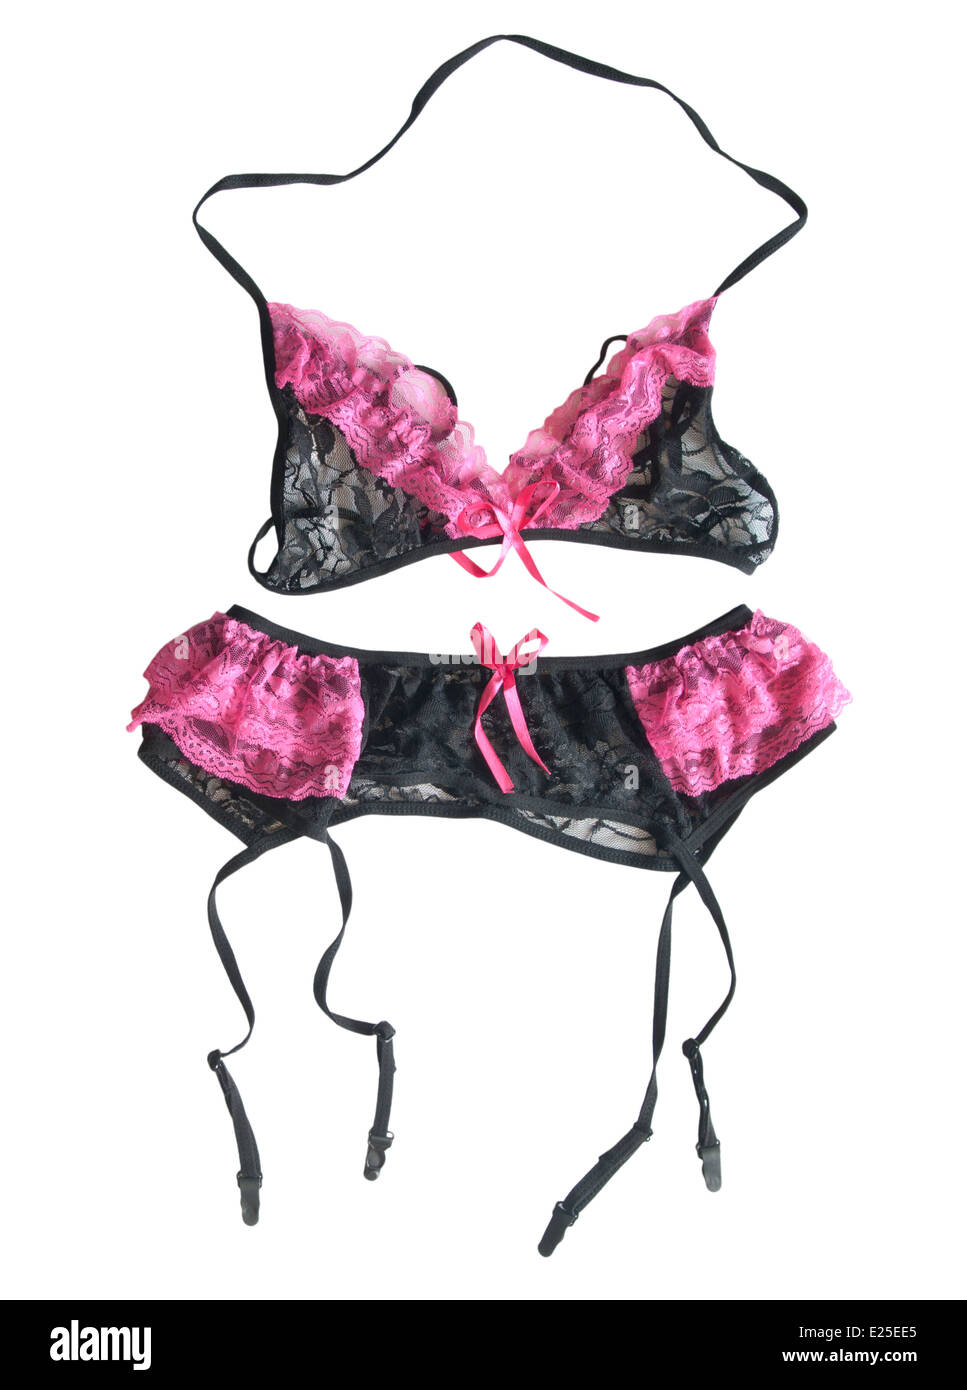 https://c8.alamy.com/comp/E25EE5/sexy-ladies-underwear-lacy-pink-and-black-lingerie-bra-and-suspender-E25EE5.jpg